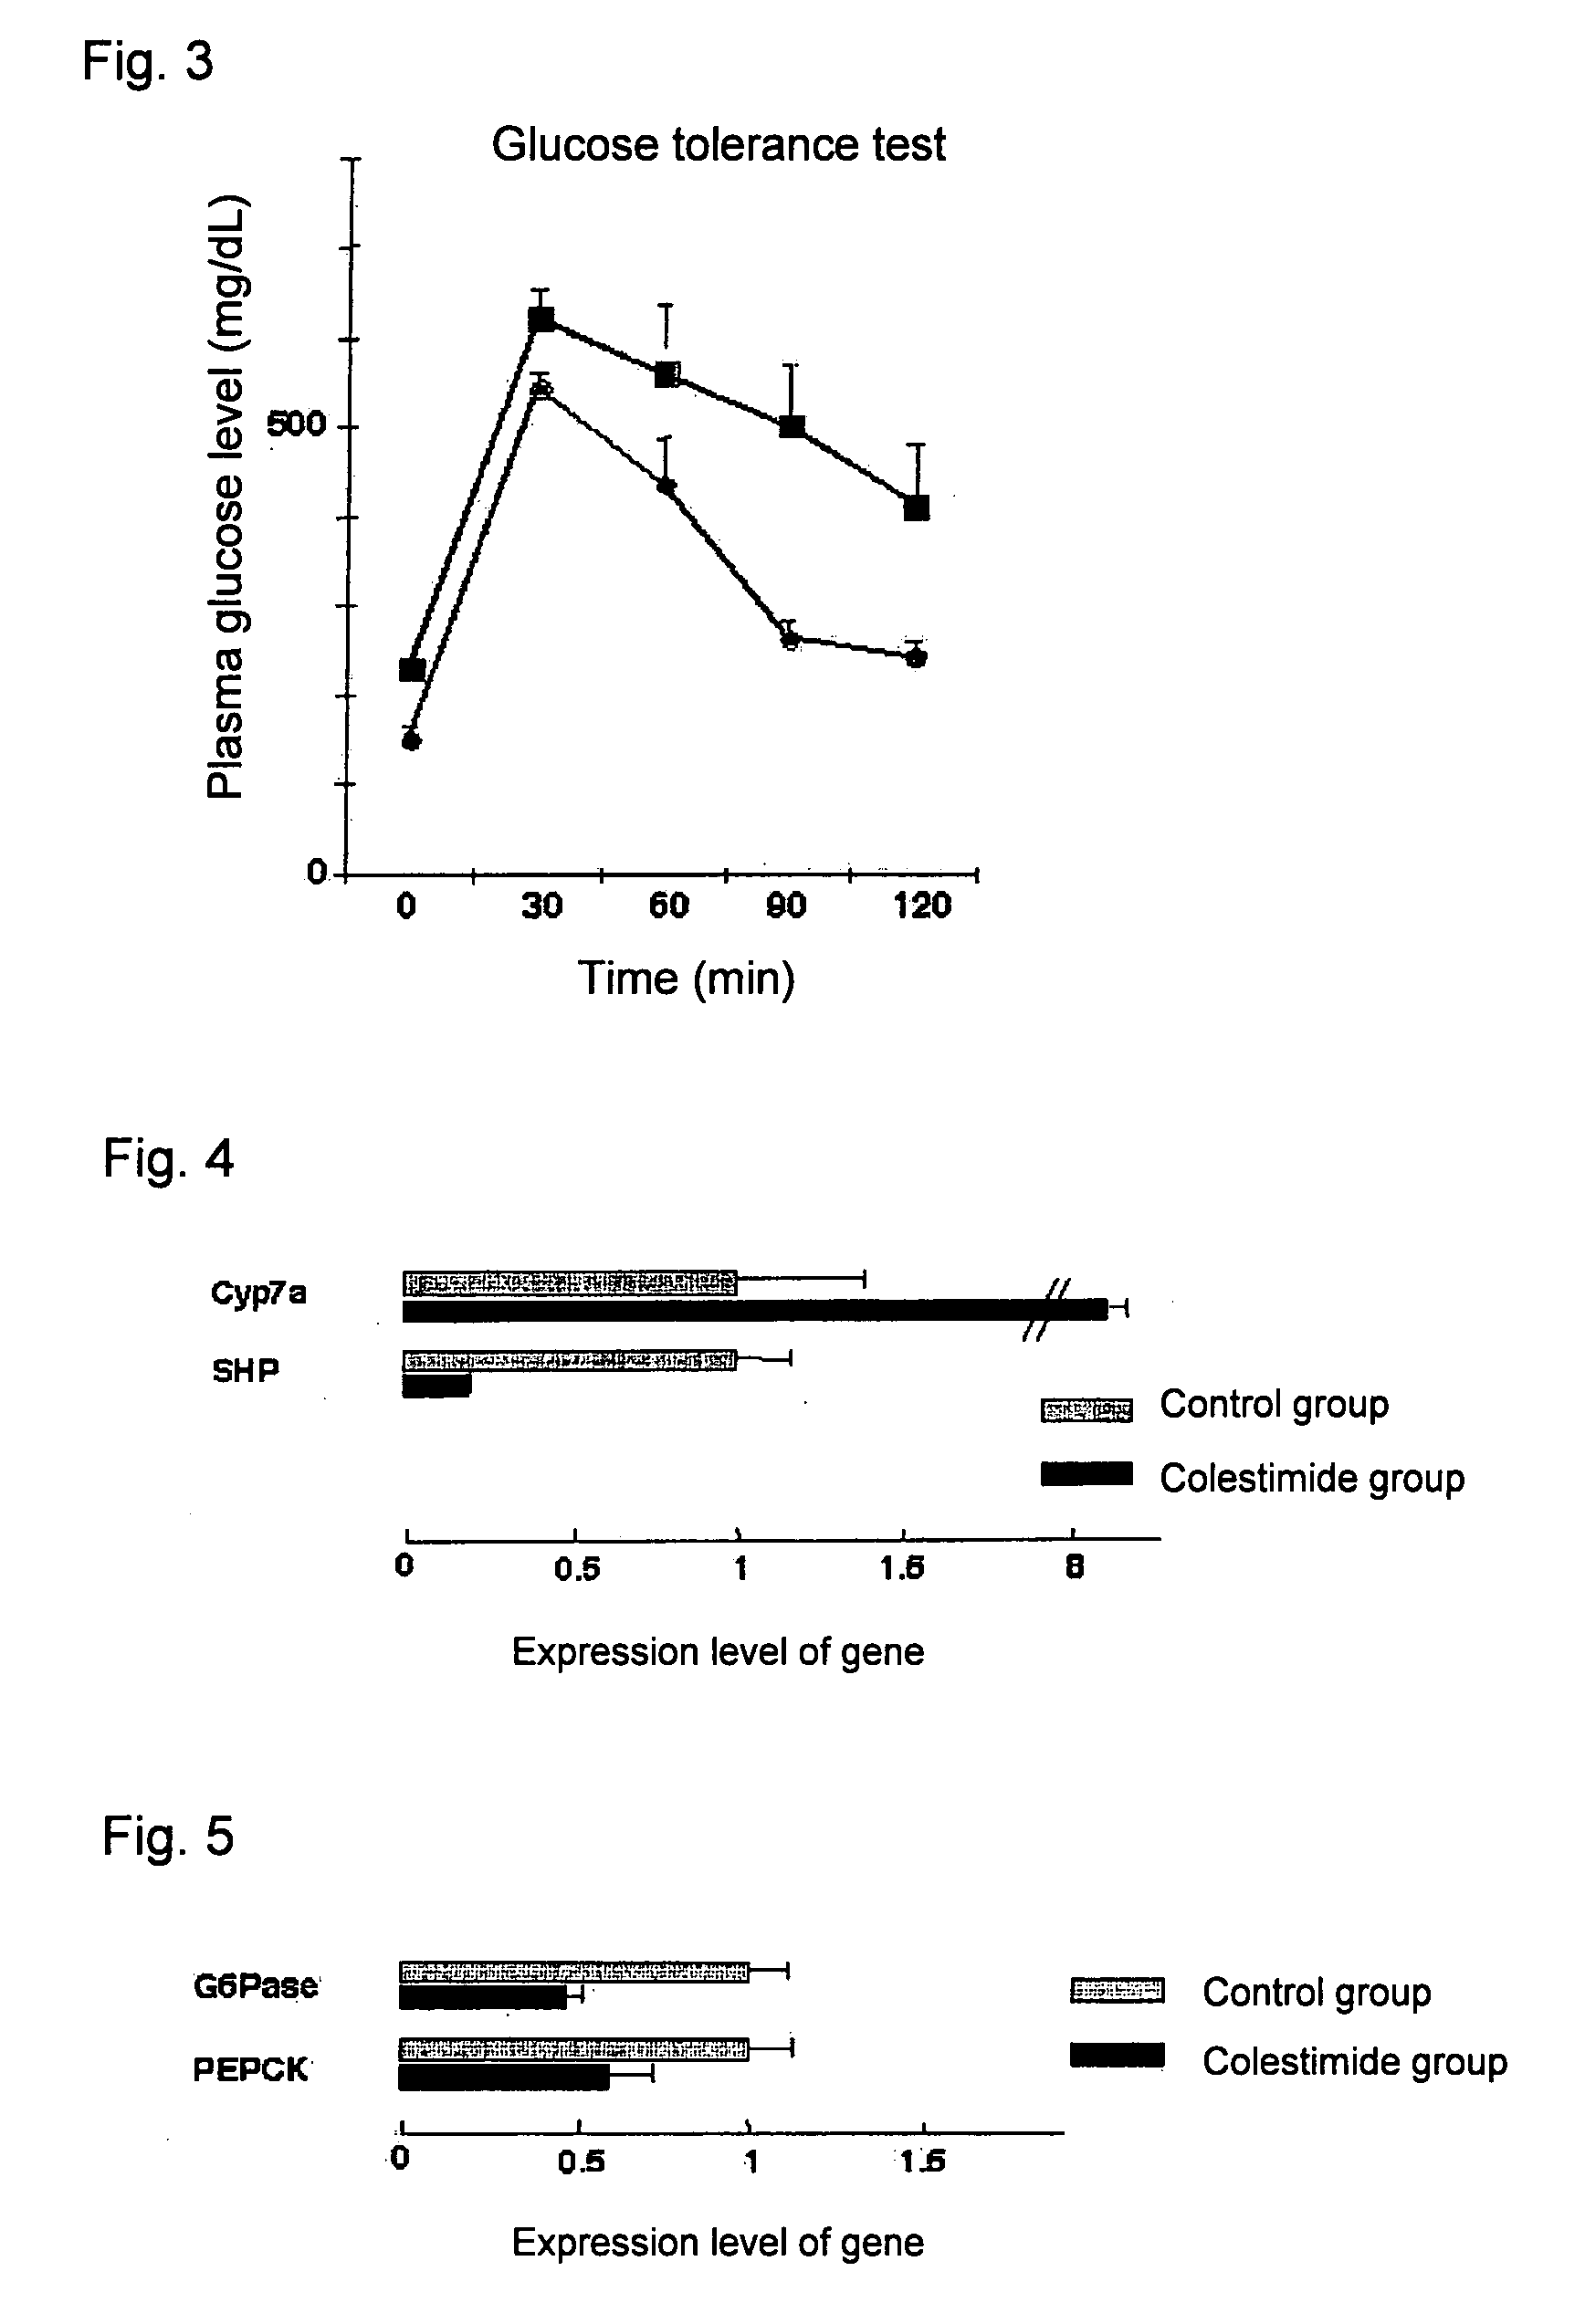 Agent for prophylactic and/or therapeutic treatment of diabetes